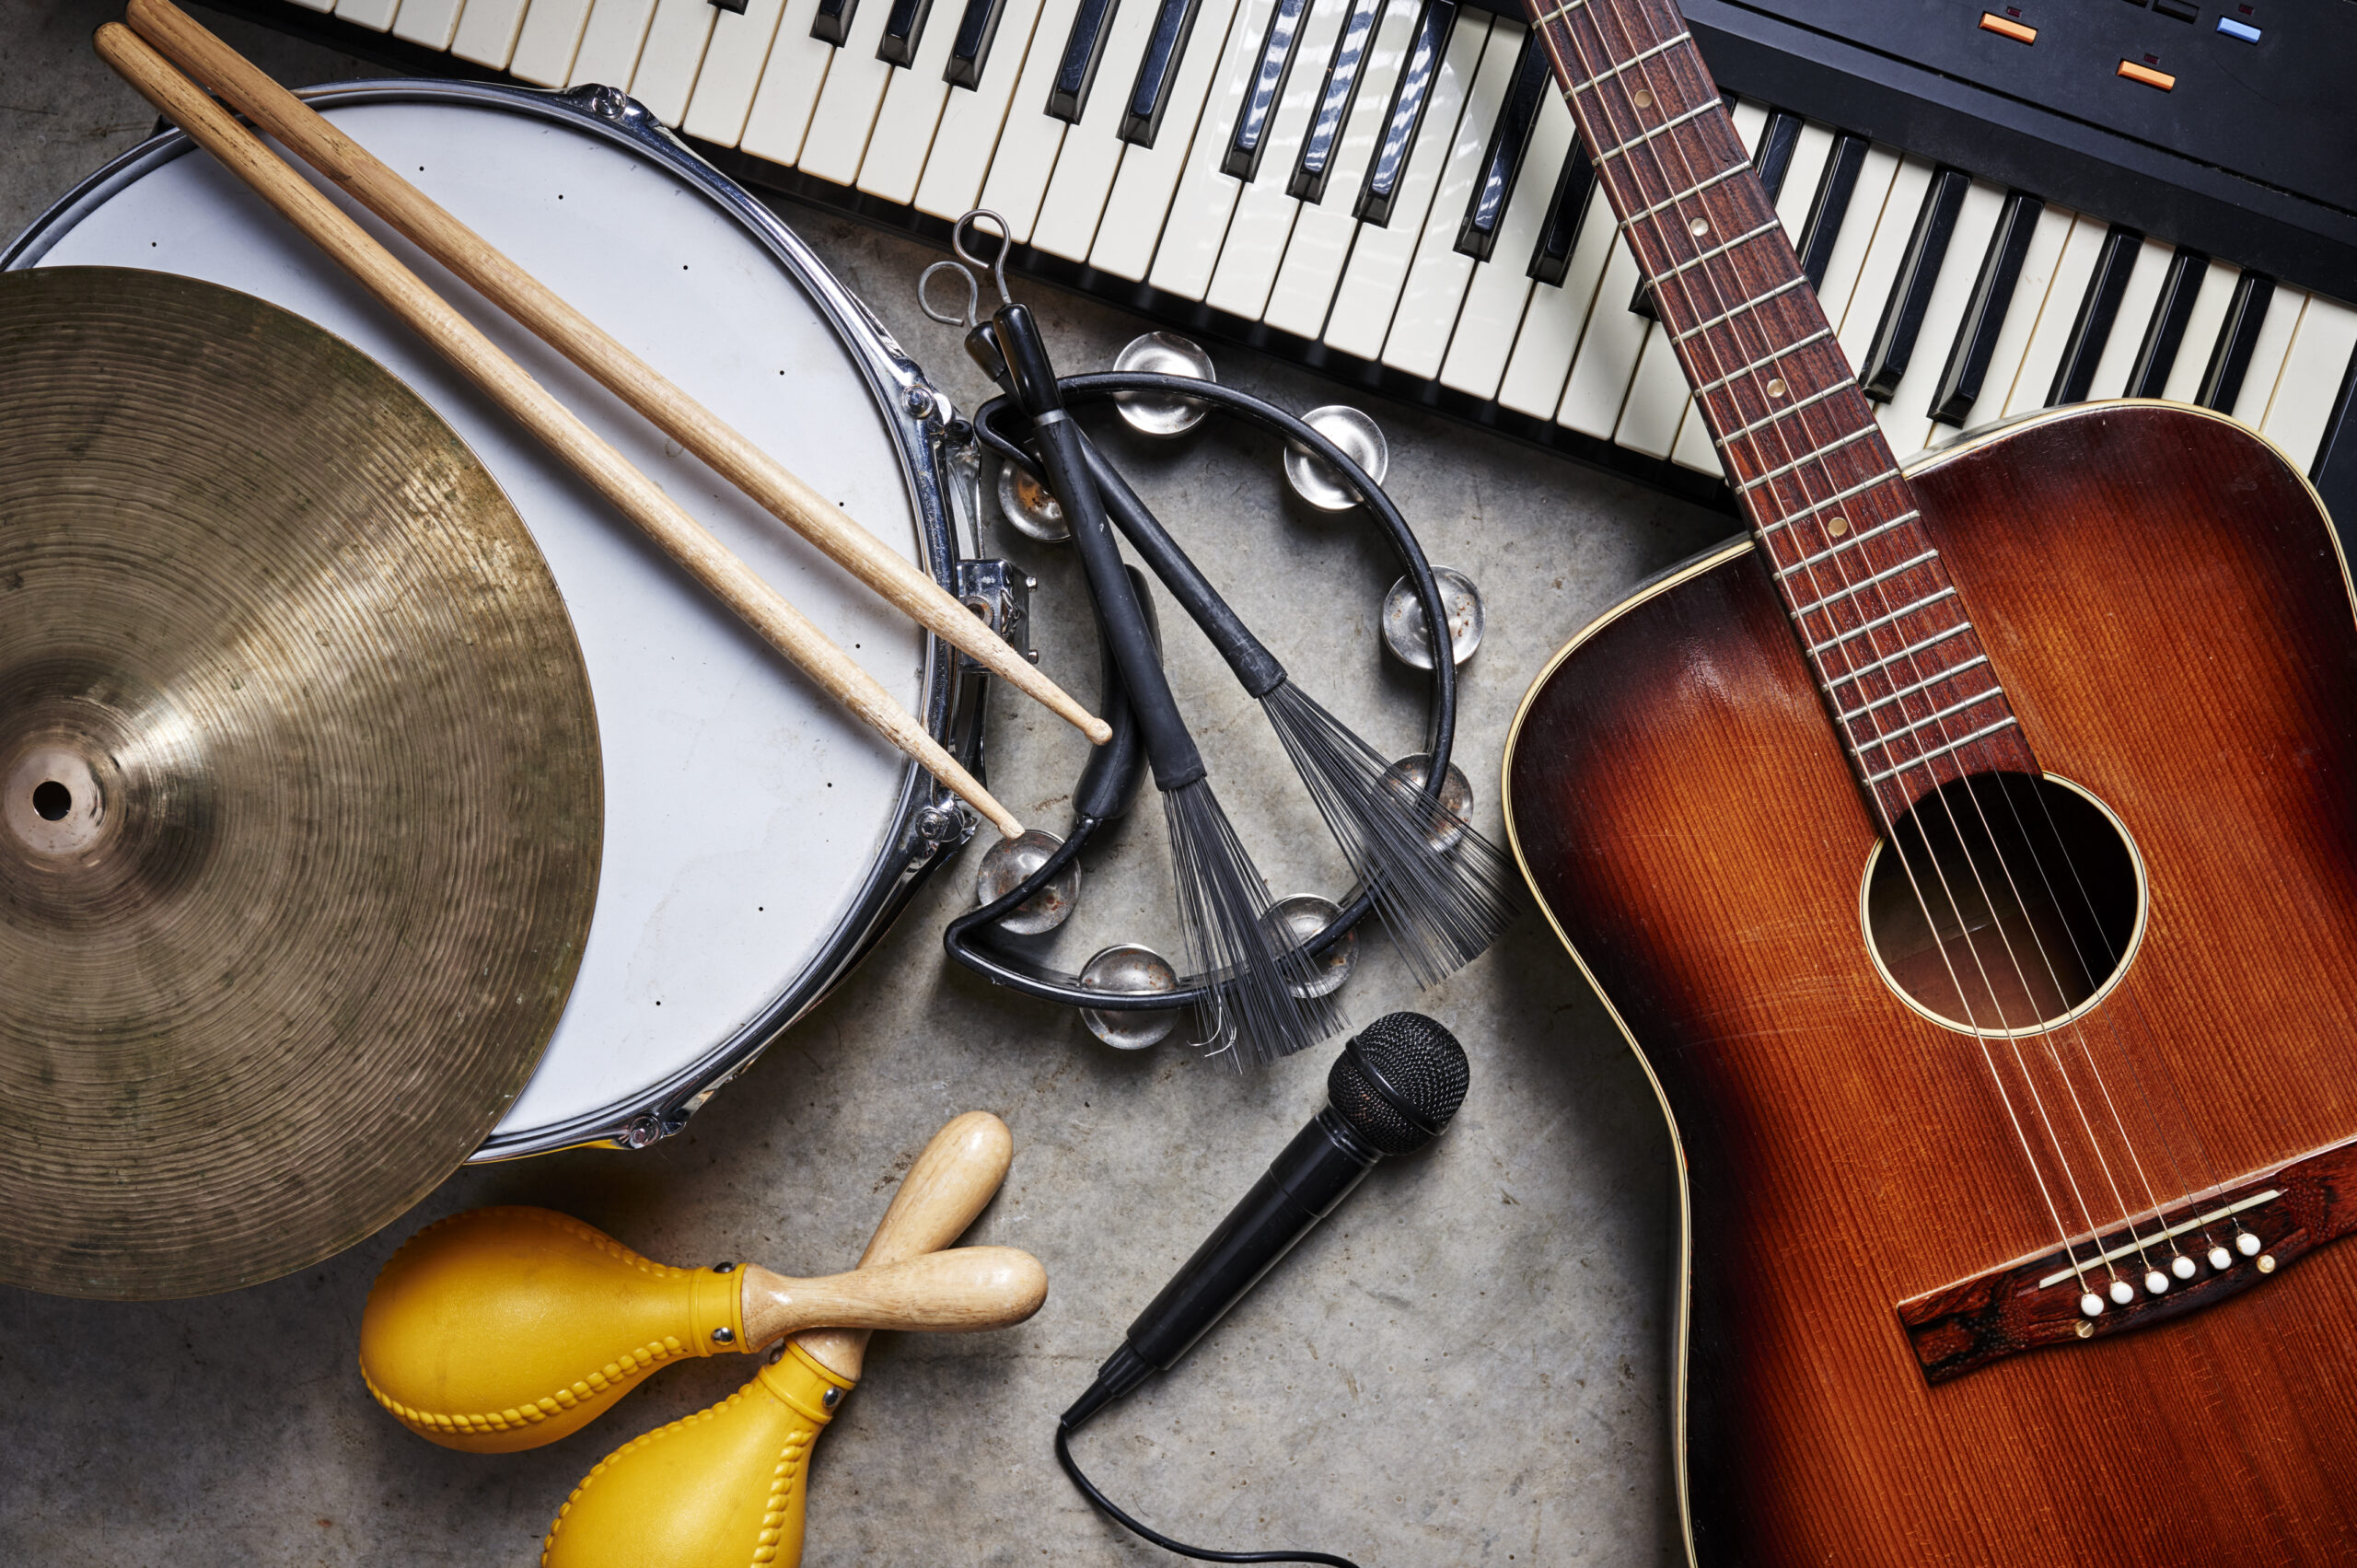 A selection of different musical instruments seen laid out on the floor. The instruments include a guitar, maracas and a tambourine.